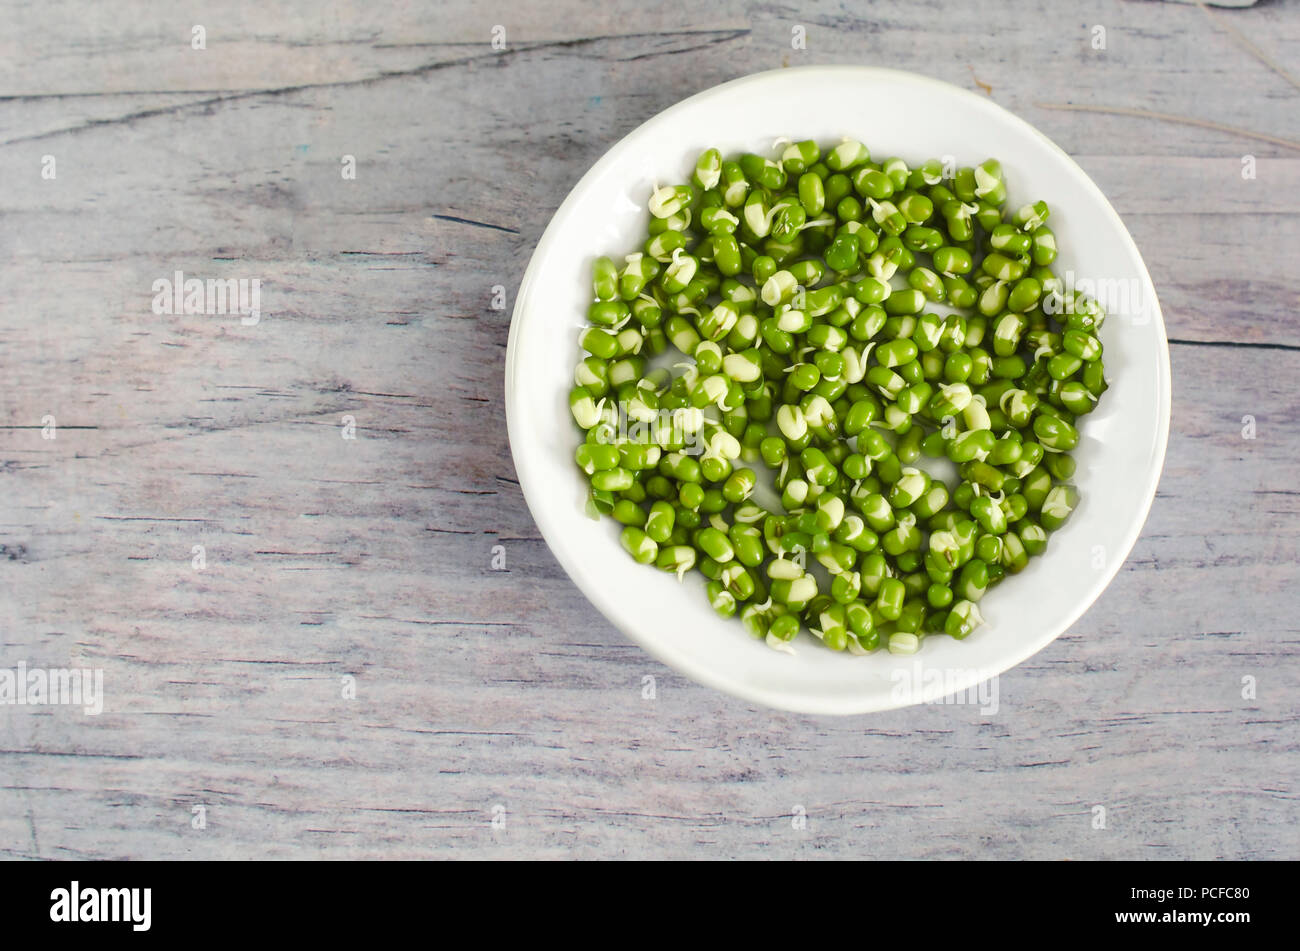 Sprouted mung beans. Sprouted mung beans on white plate. Mung beans sprouts background. Bean sprouts. Green radiata vigna. Stock Photo